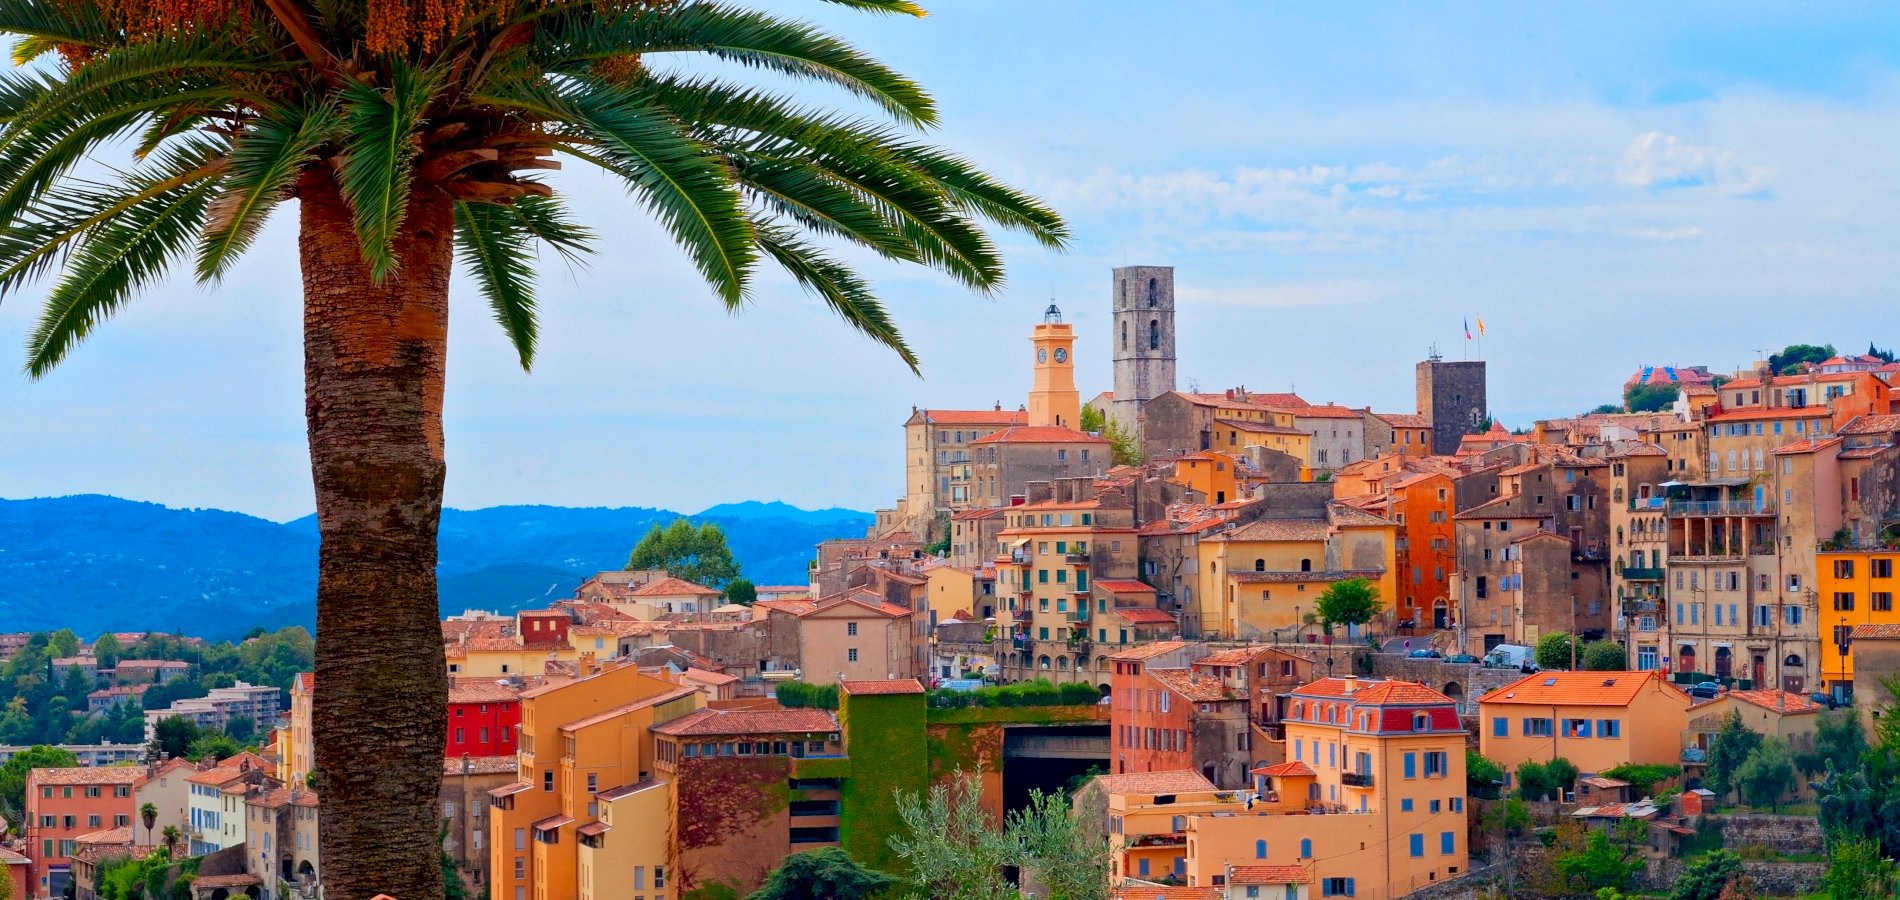 Ophorus Tours - A Private Shore Excursion From Cannes to Visit Cannes & Grasse Village 